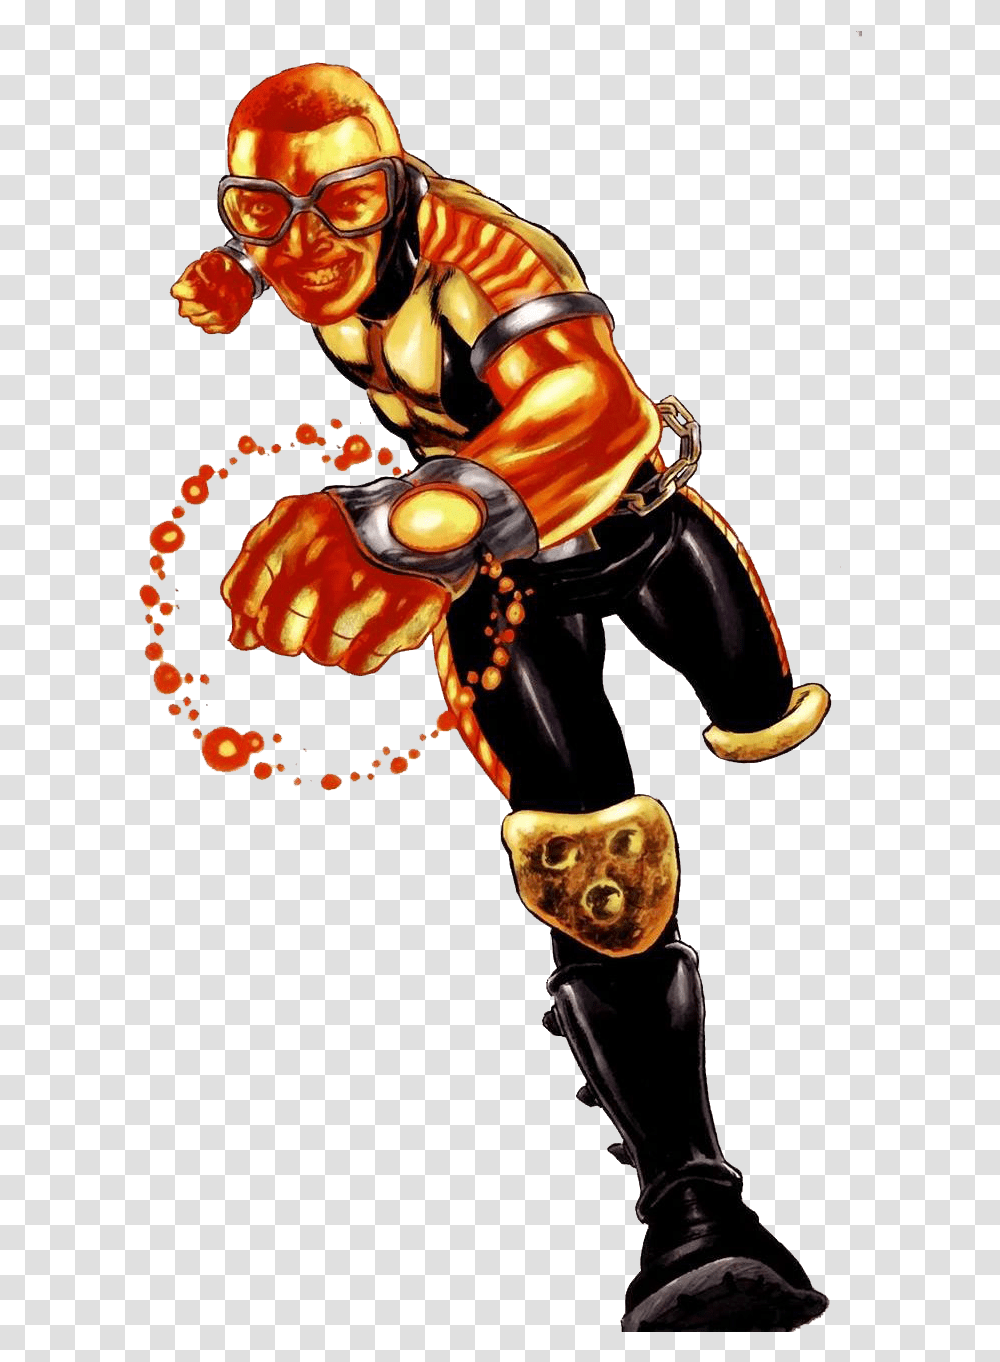 Victor Alvarez From Power Man And Iron Fist Vol 2 Power Man And Iron Fist, Person, Human, Hand Transparent Png